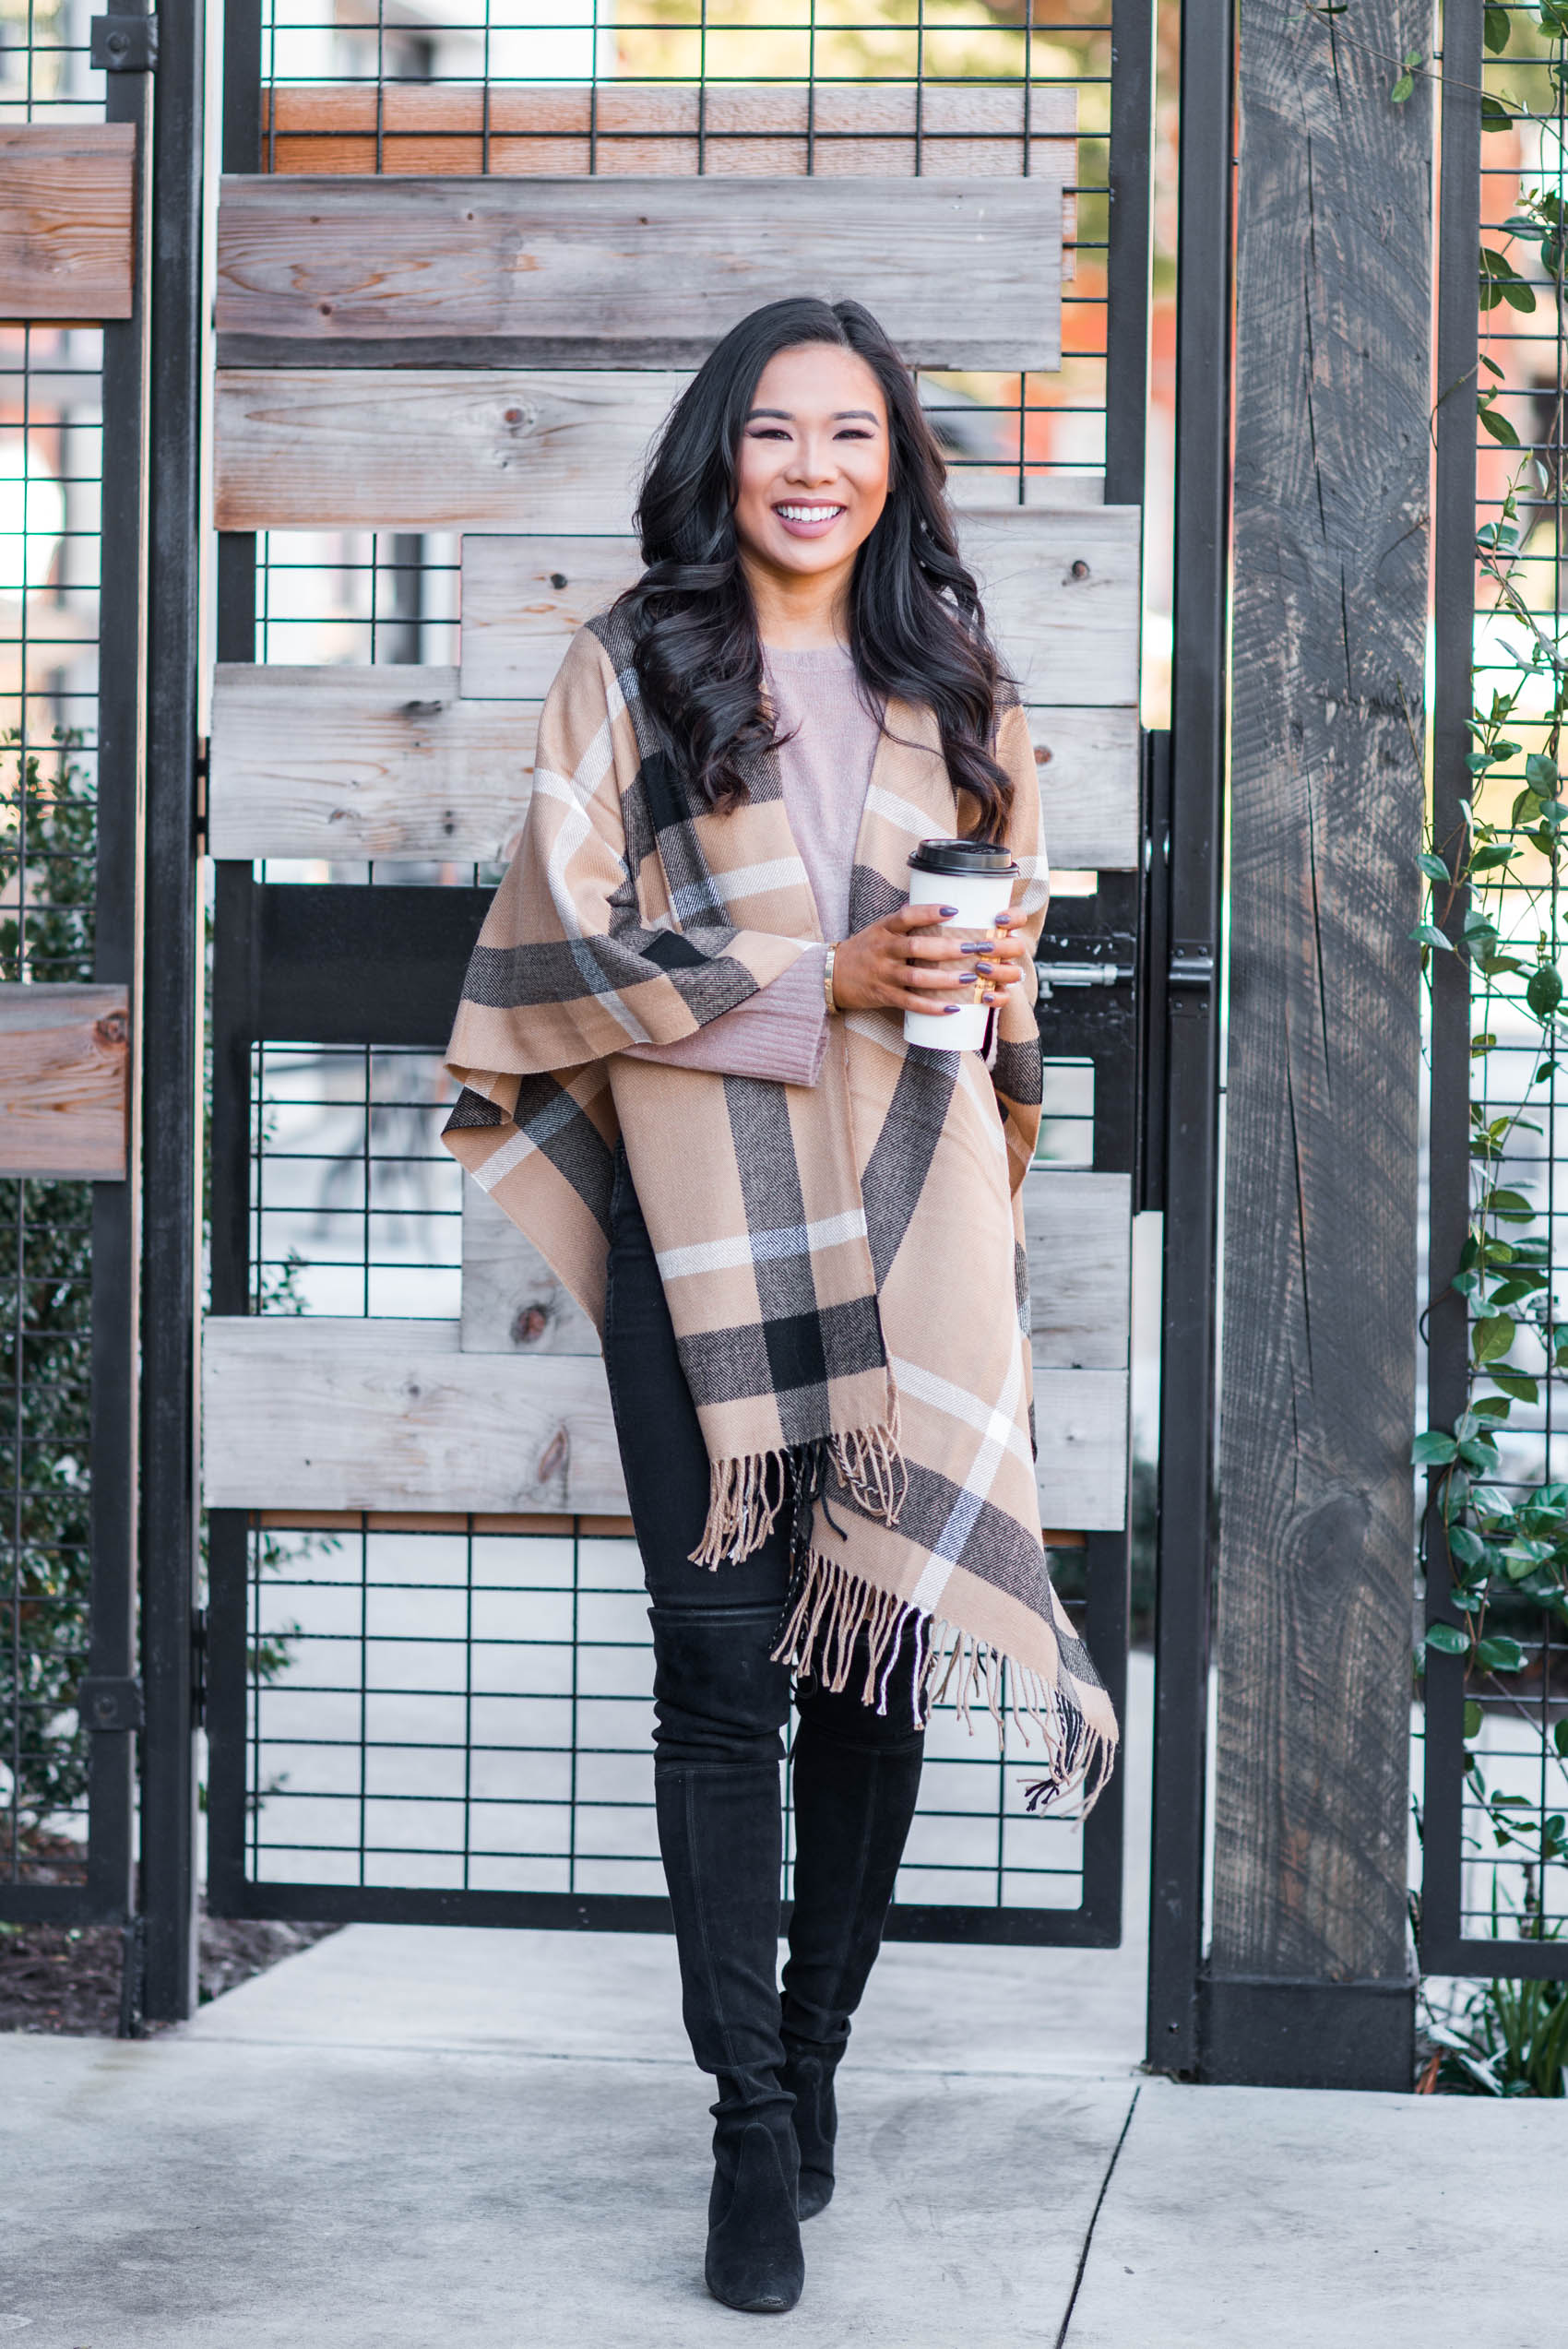 Blogger Hoang-Kim wears a plaid poncho as a practical gift to give for Christmas